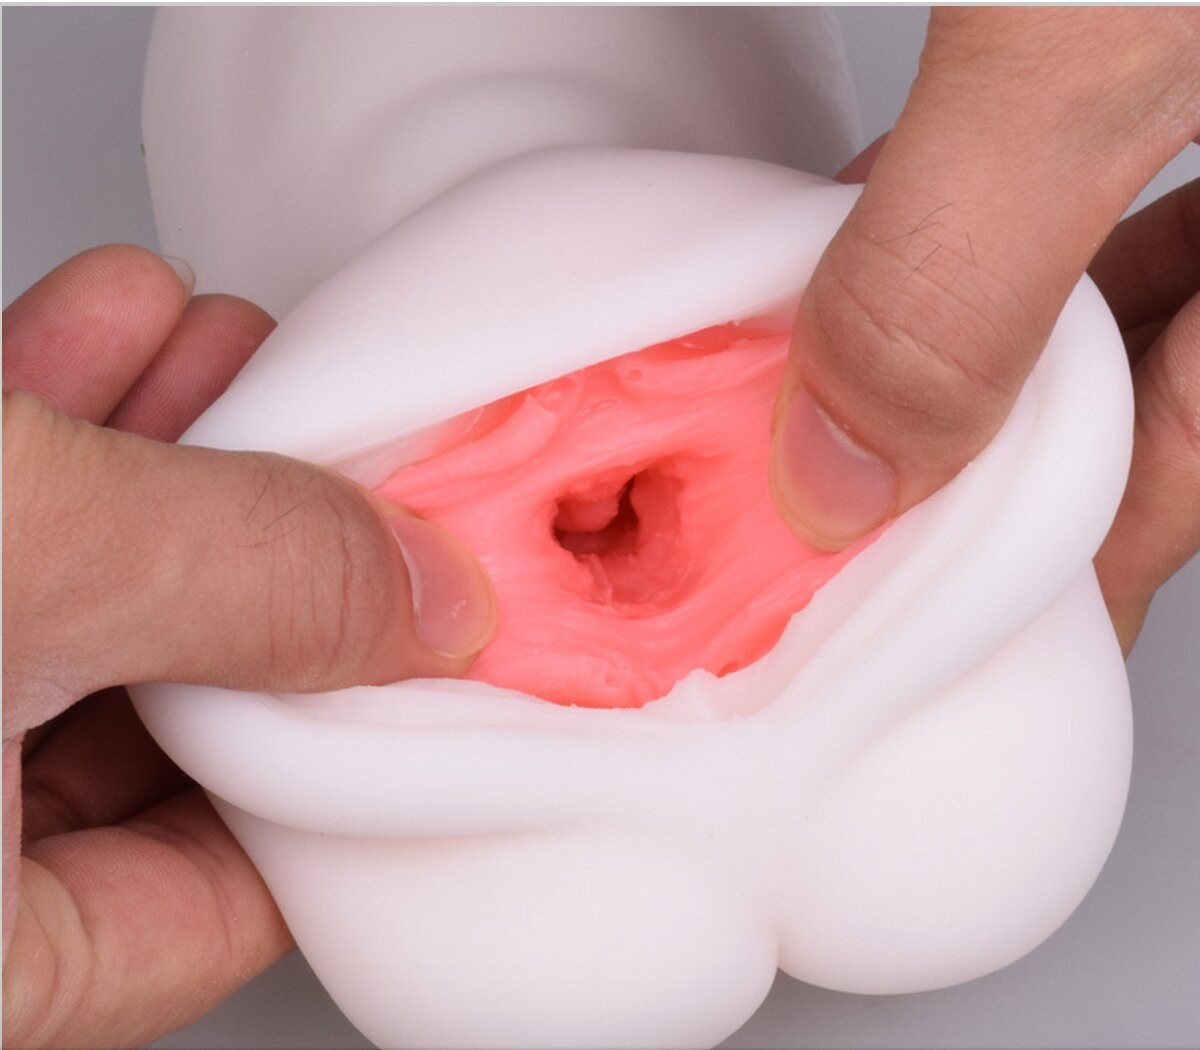 How to make a vagina from silicone (71 photos) photo